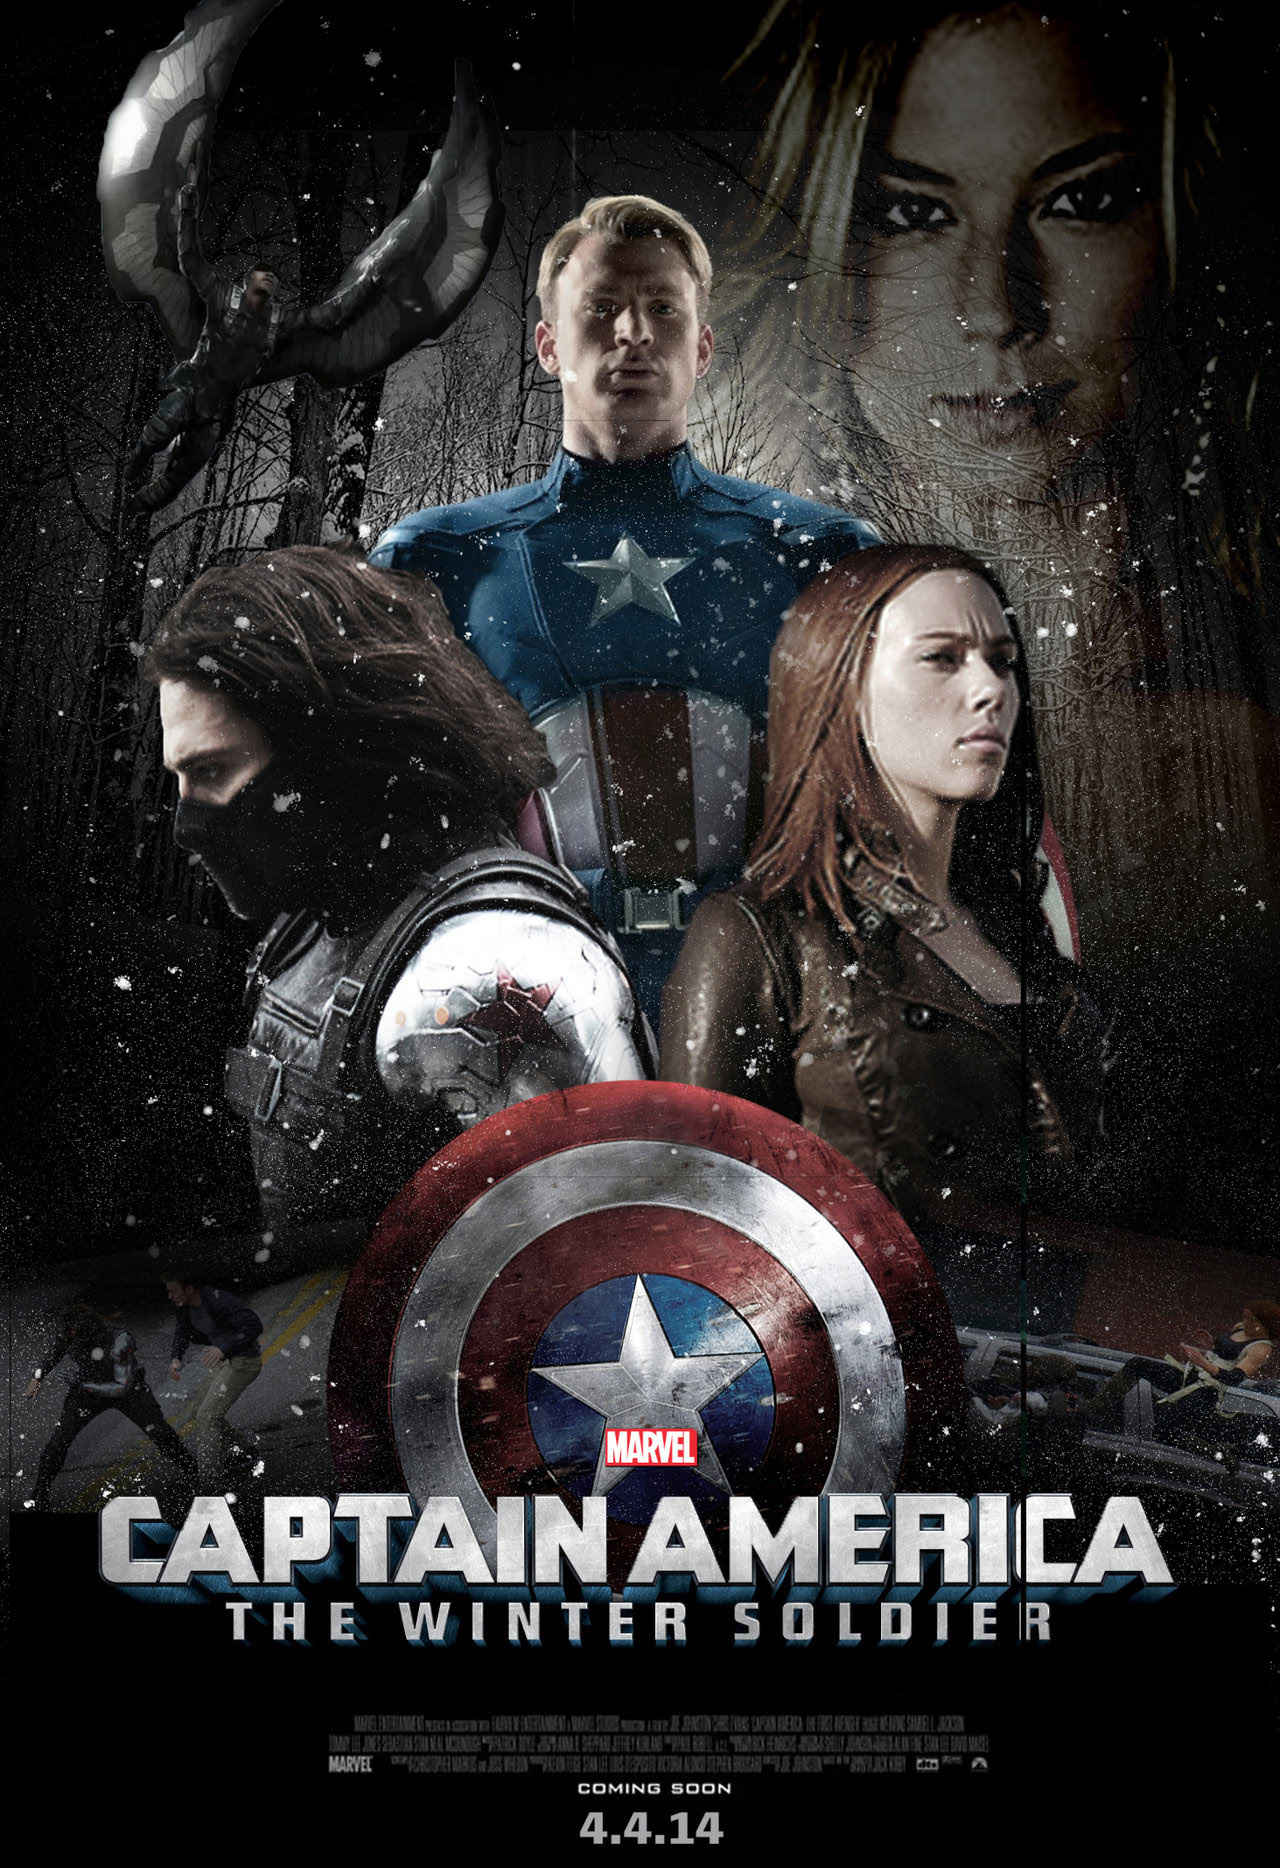 Captain America The Winter Soldier Poster - Film Captain America The Winter Soldier , HD Wallpaper & Backgrounds